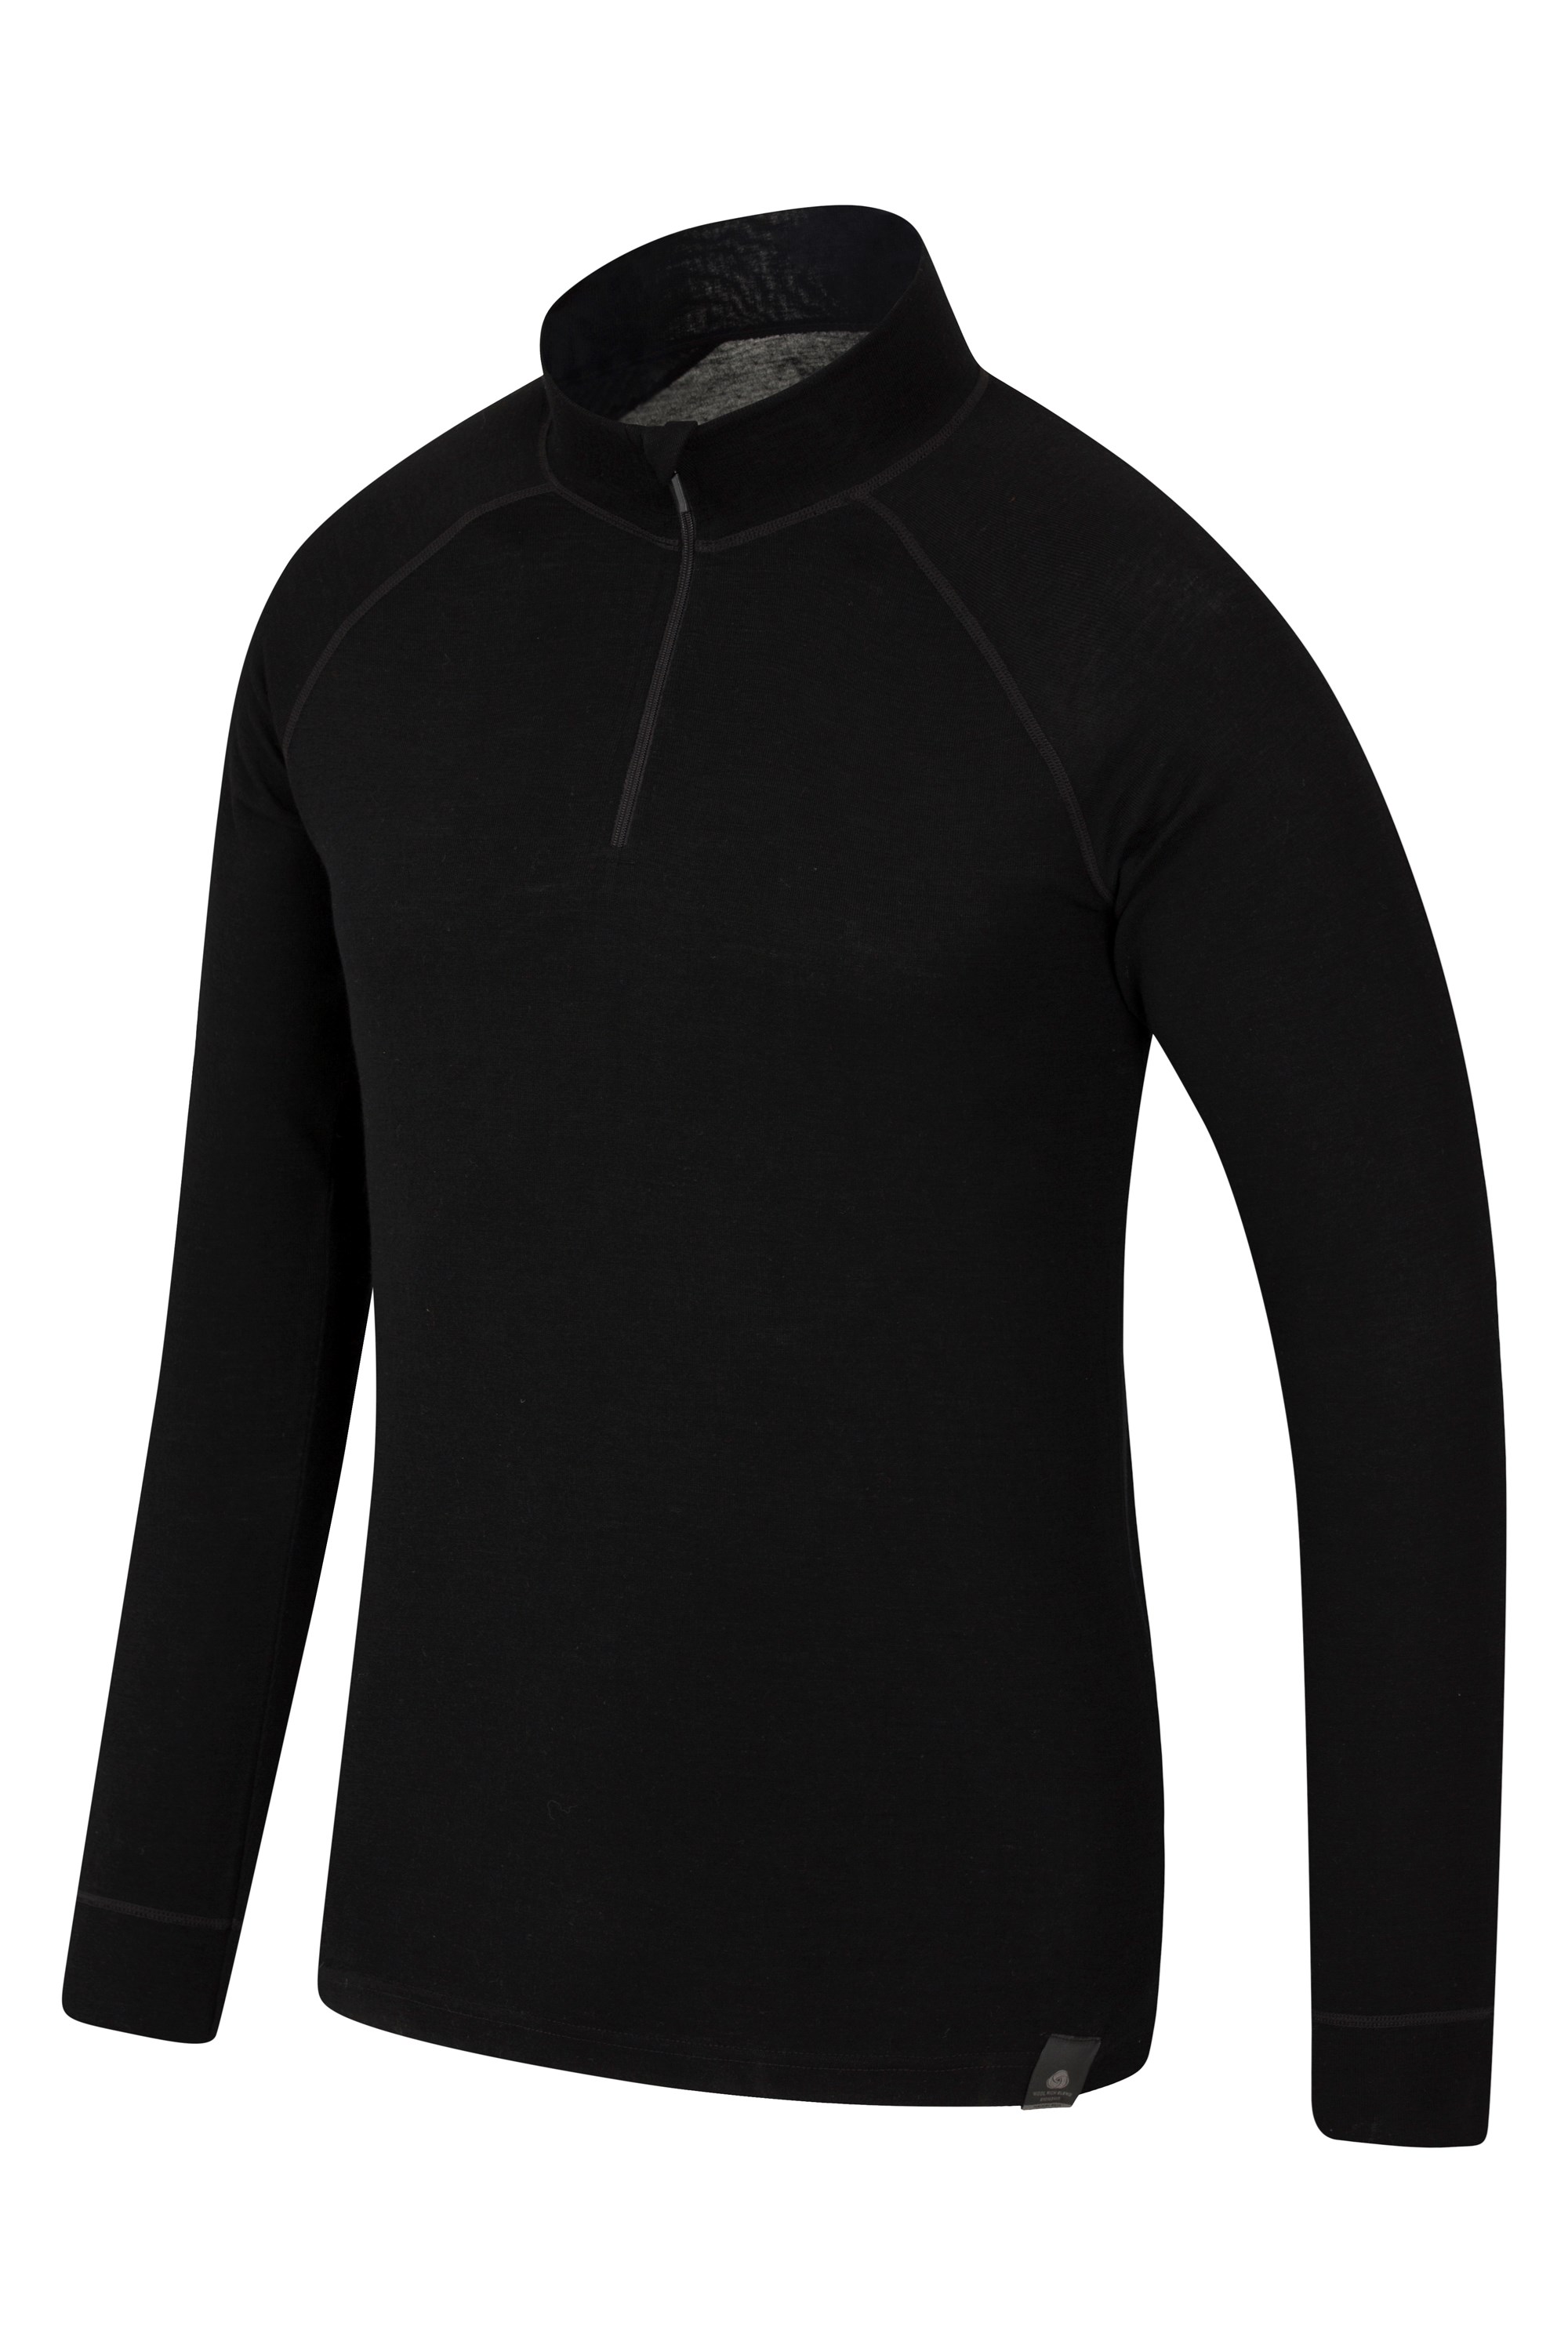 Mountain Warehouse Mountain Warehouse Mens Round Neck Base Layer Cosy Long Sleeve Merino Top 2 Pack 